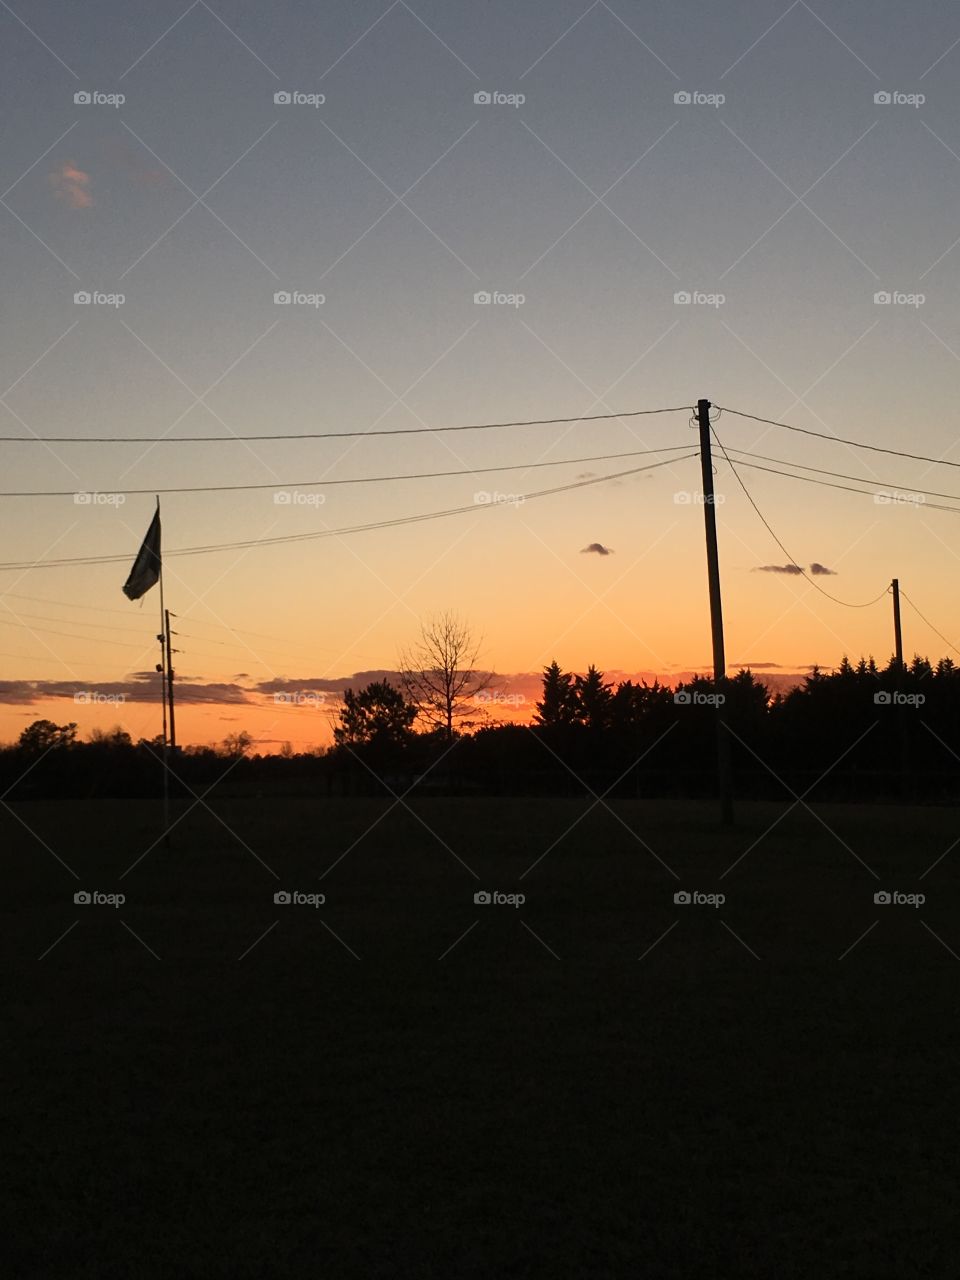 Gorgeous, colorful sunset with flag flying and tree outlines